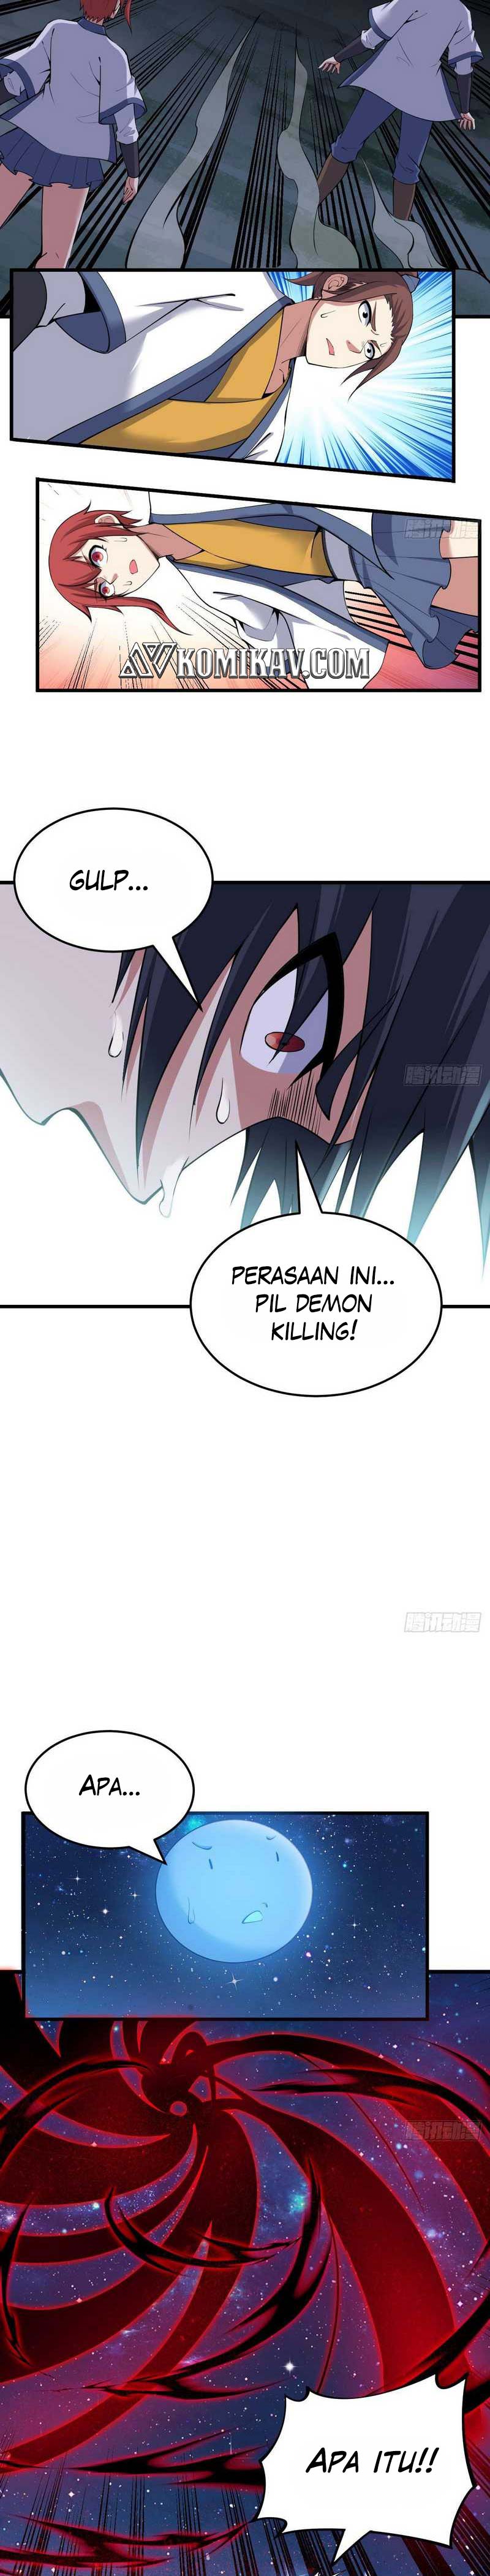 Dilarang COPAS - situs resmi www.mangacanblog.com - Komik i just want to be beaten to death by everyone 098 - chapter 98 99 Indonesia i just want to be beaten to death by everyone 098 - chapter 98 Terbaru 6|Baca Manga Komik Indonesia|Mangacan